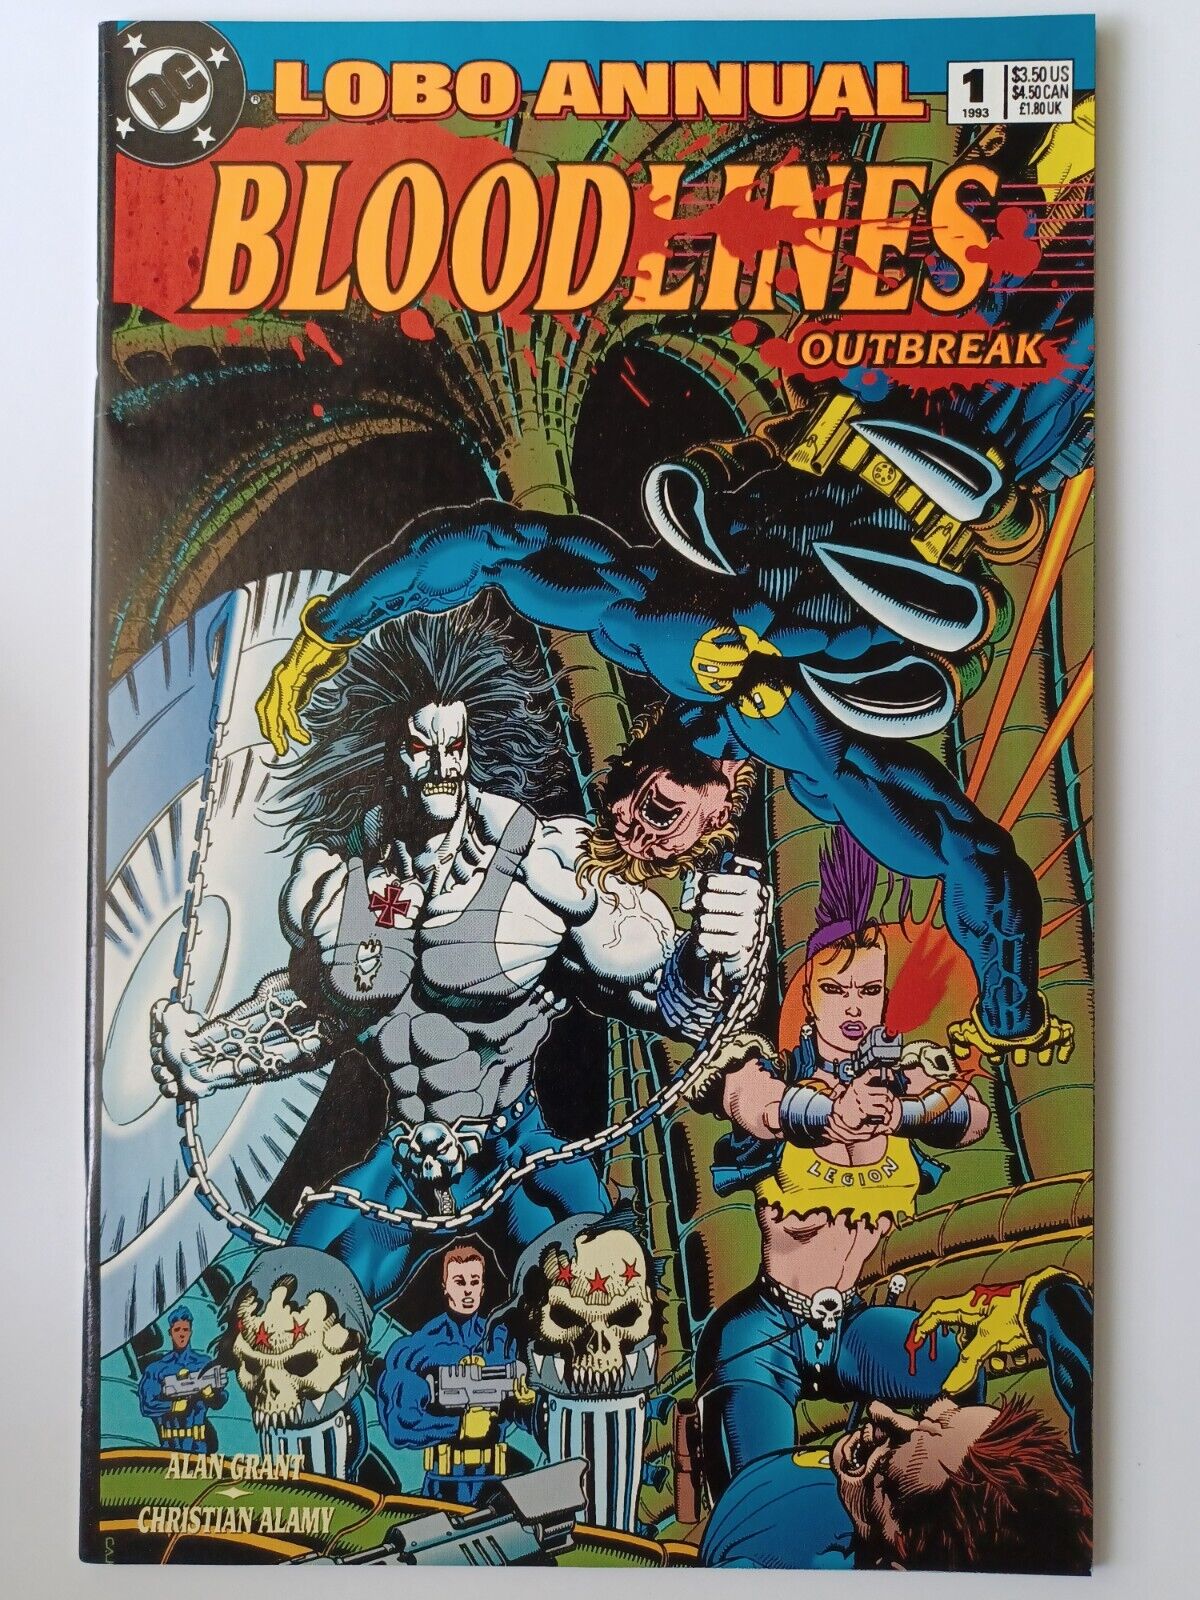 Lobo Annual #1 Bloodlines Outbreak - We Combine Shipping Great Pics